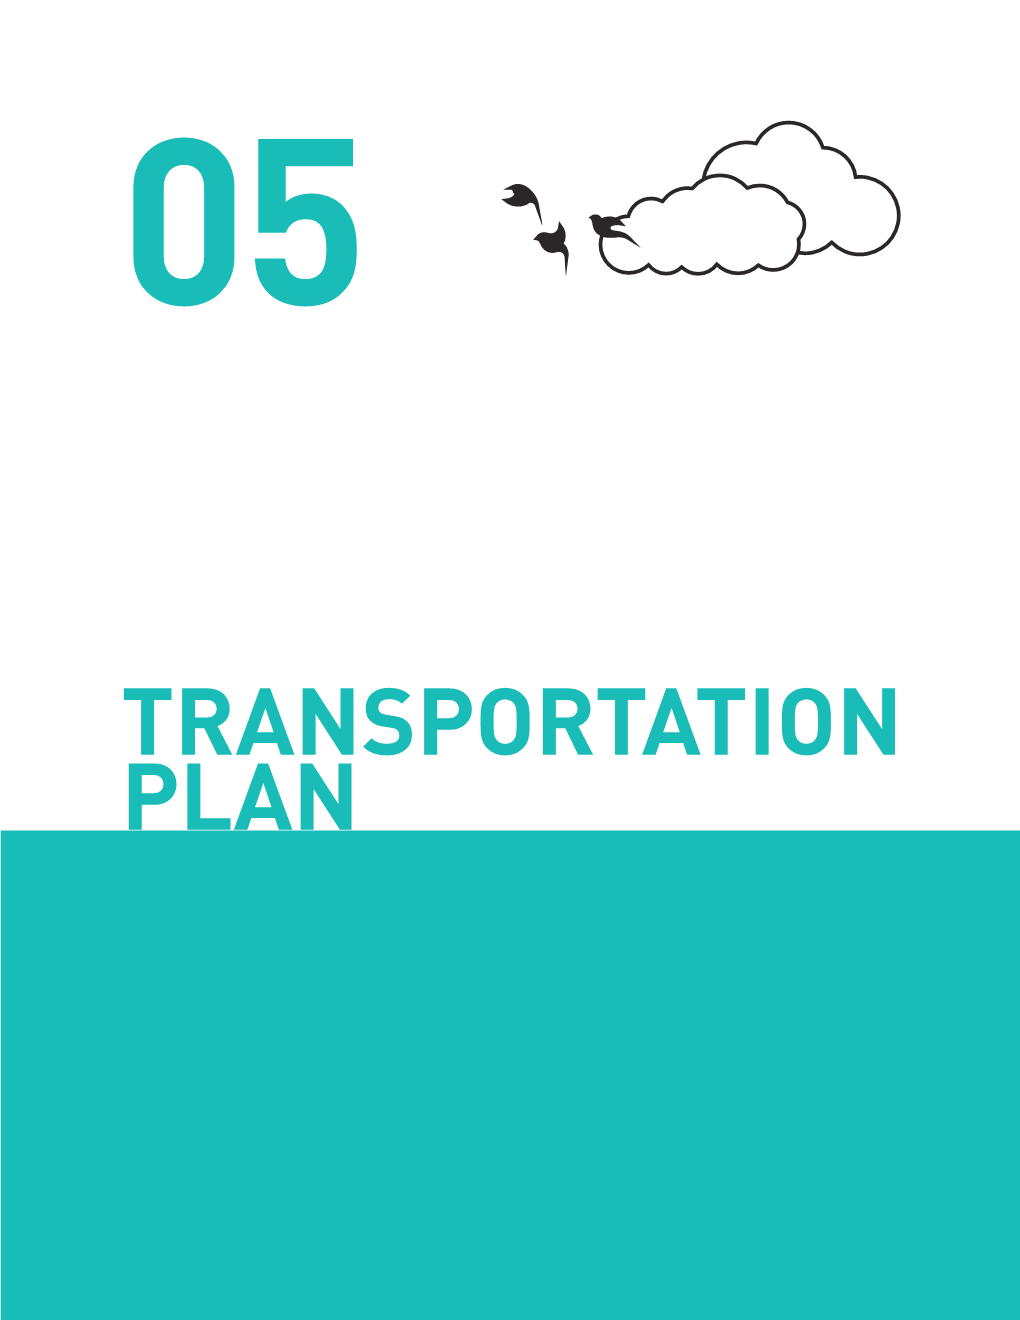 TRANSPORTATION PLAN Land Use Patterns and Transportation Systems Are Inherently Interconnected